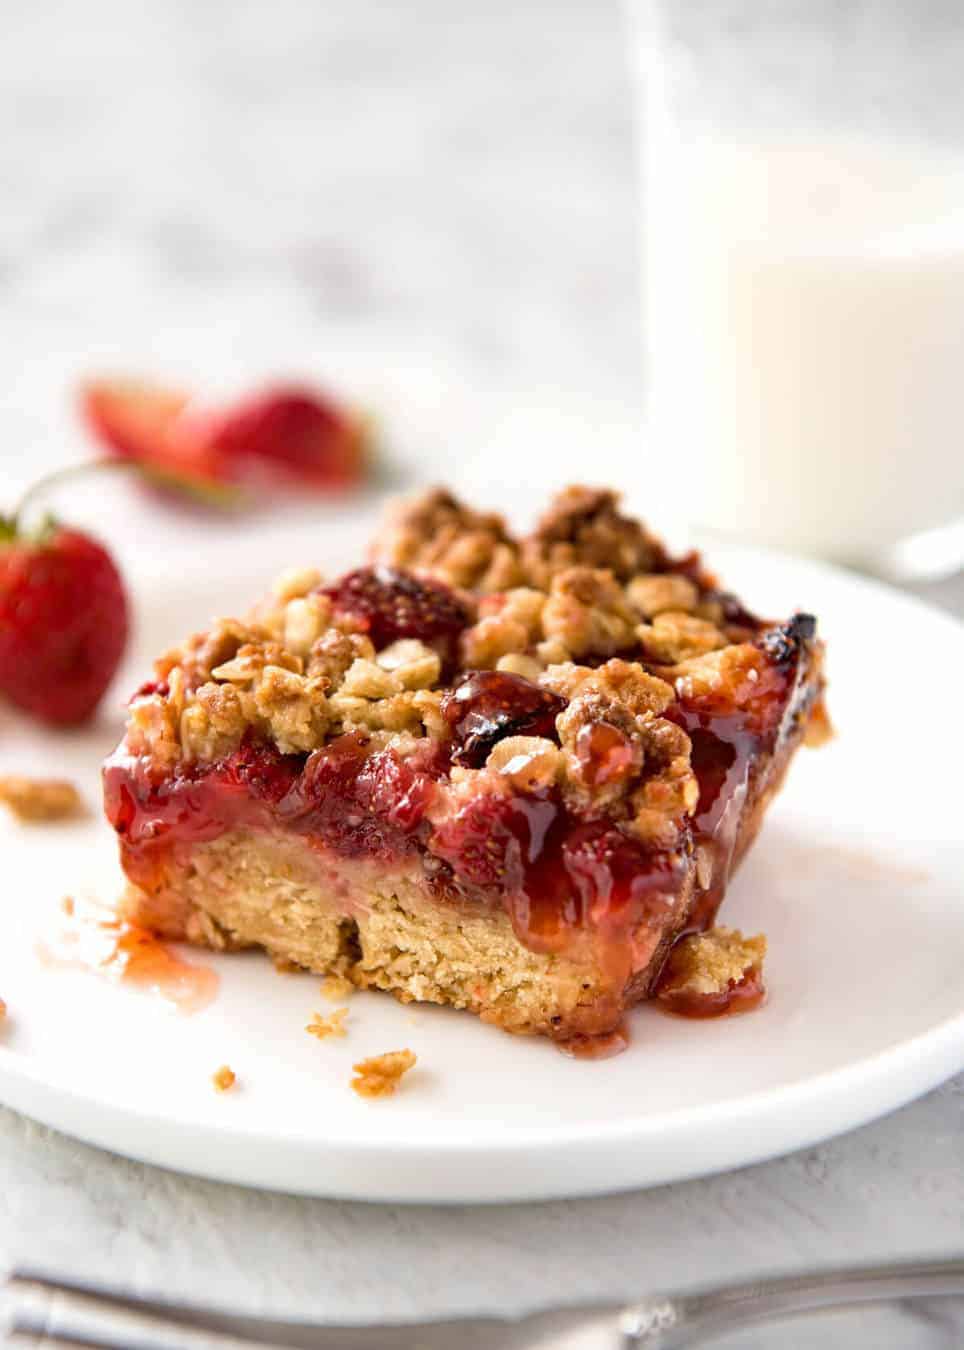 Fresh Strawberry Bars with a buttery biscuit base, topped with jam, fresh strawberries and a crumbly topping. No mixer, quick to make! www.recipetineats.com